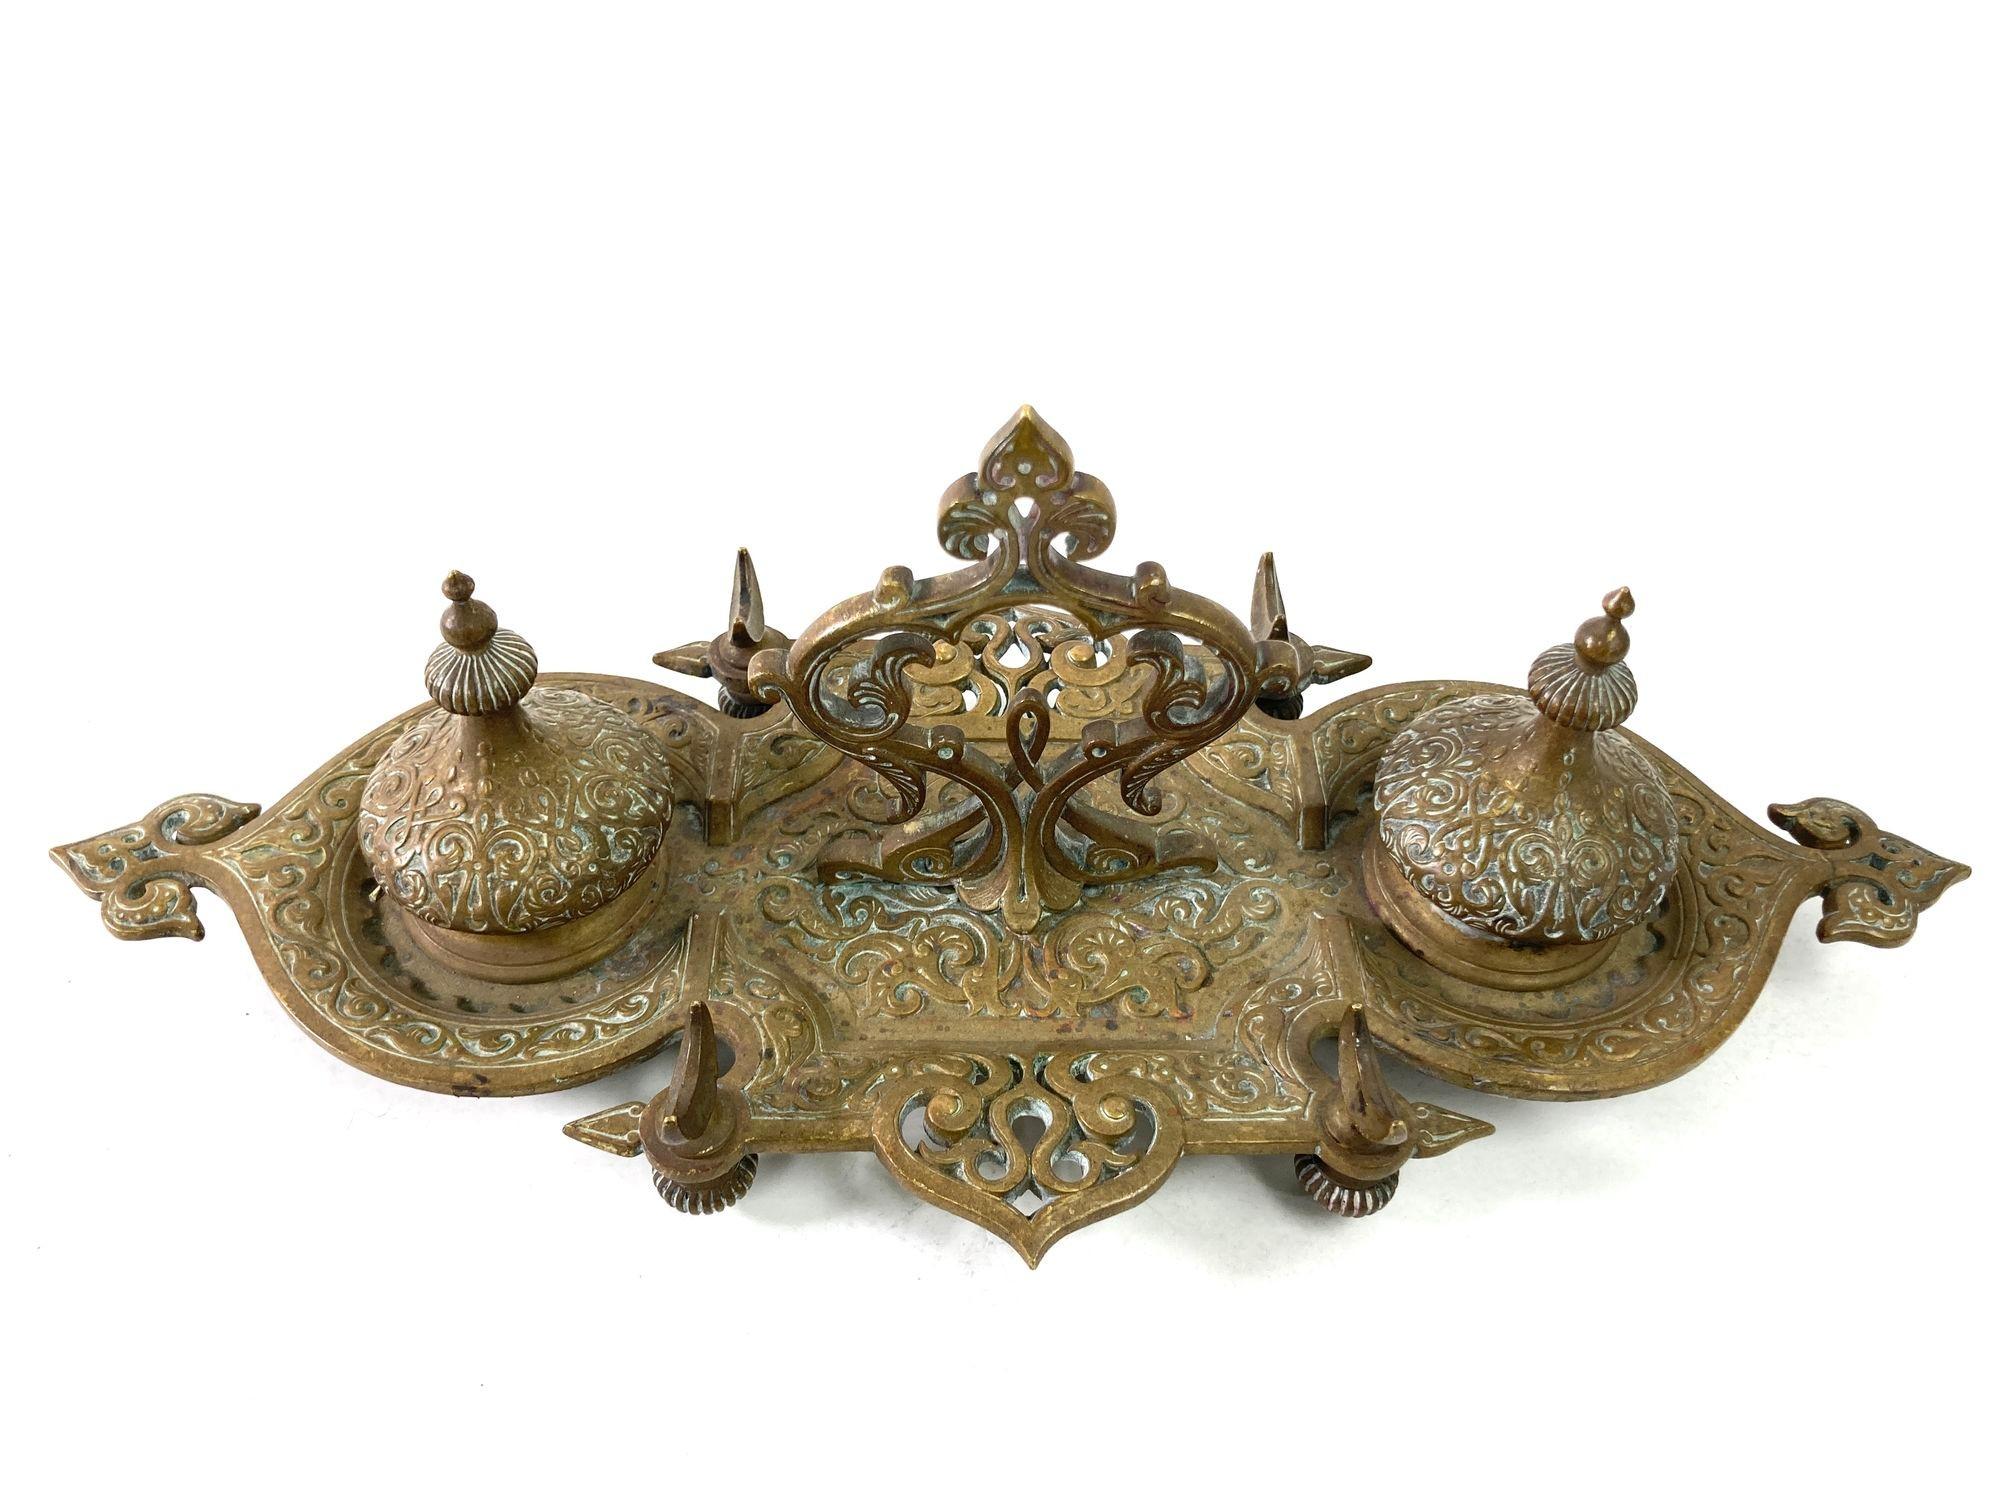 French Art Nouveau brass footed double ink well Filigree bronze Moorish Style.
Vintage Art Nouveau Victorian metal cast bronze ornate filigree double well inkwell and holders, very ornate with Orientalist influence with domes, crescent moon and